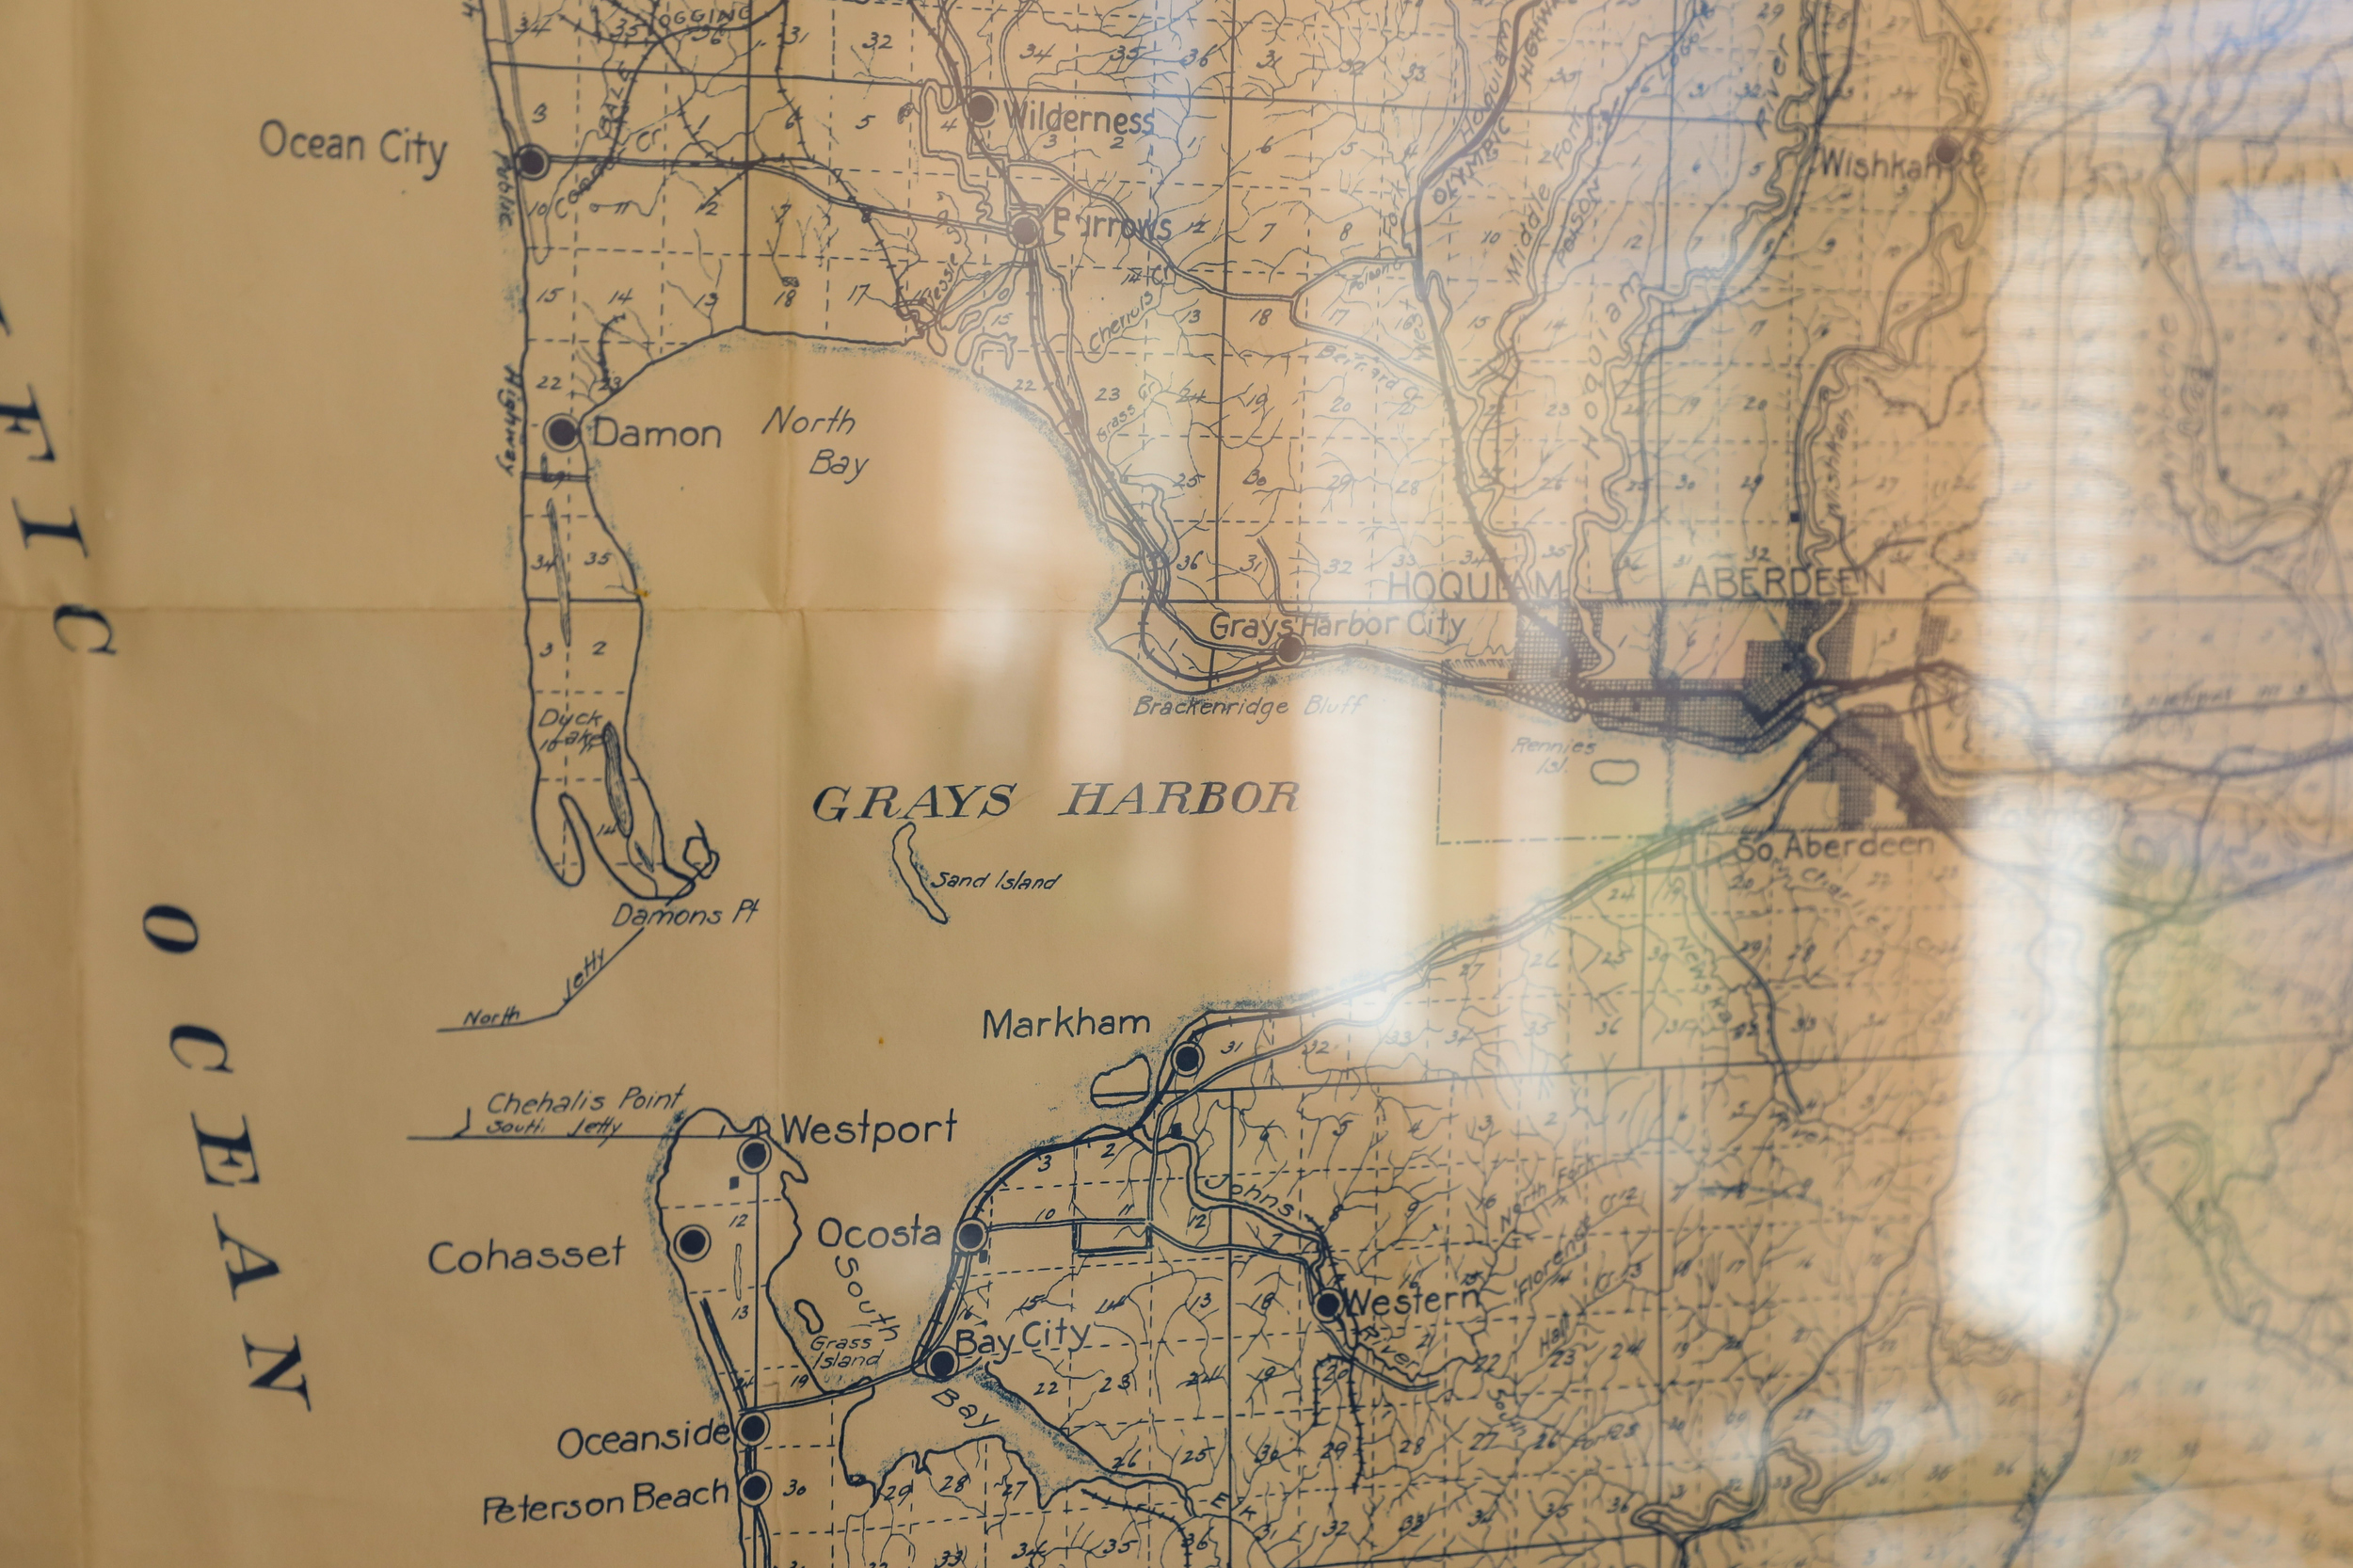 A map of Gray's Harbor